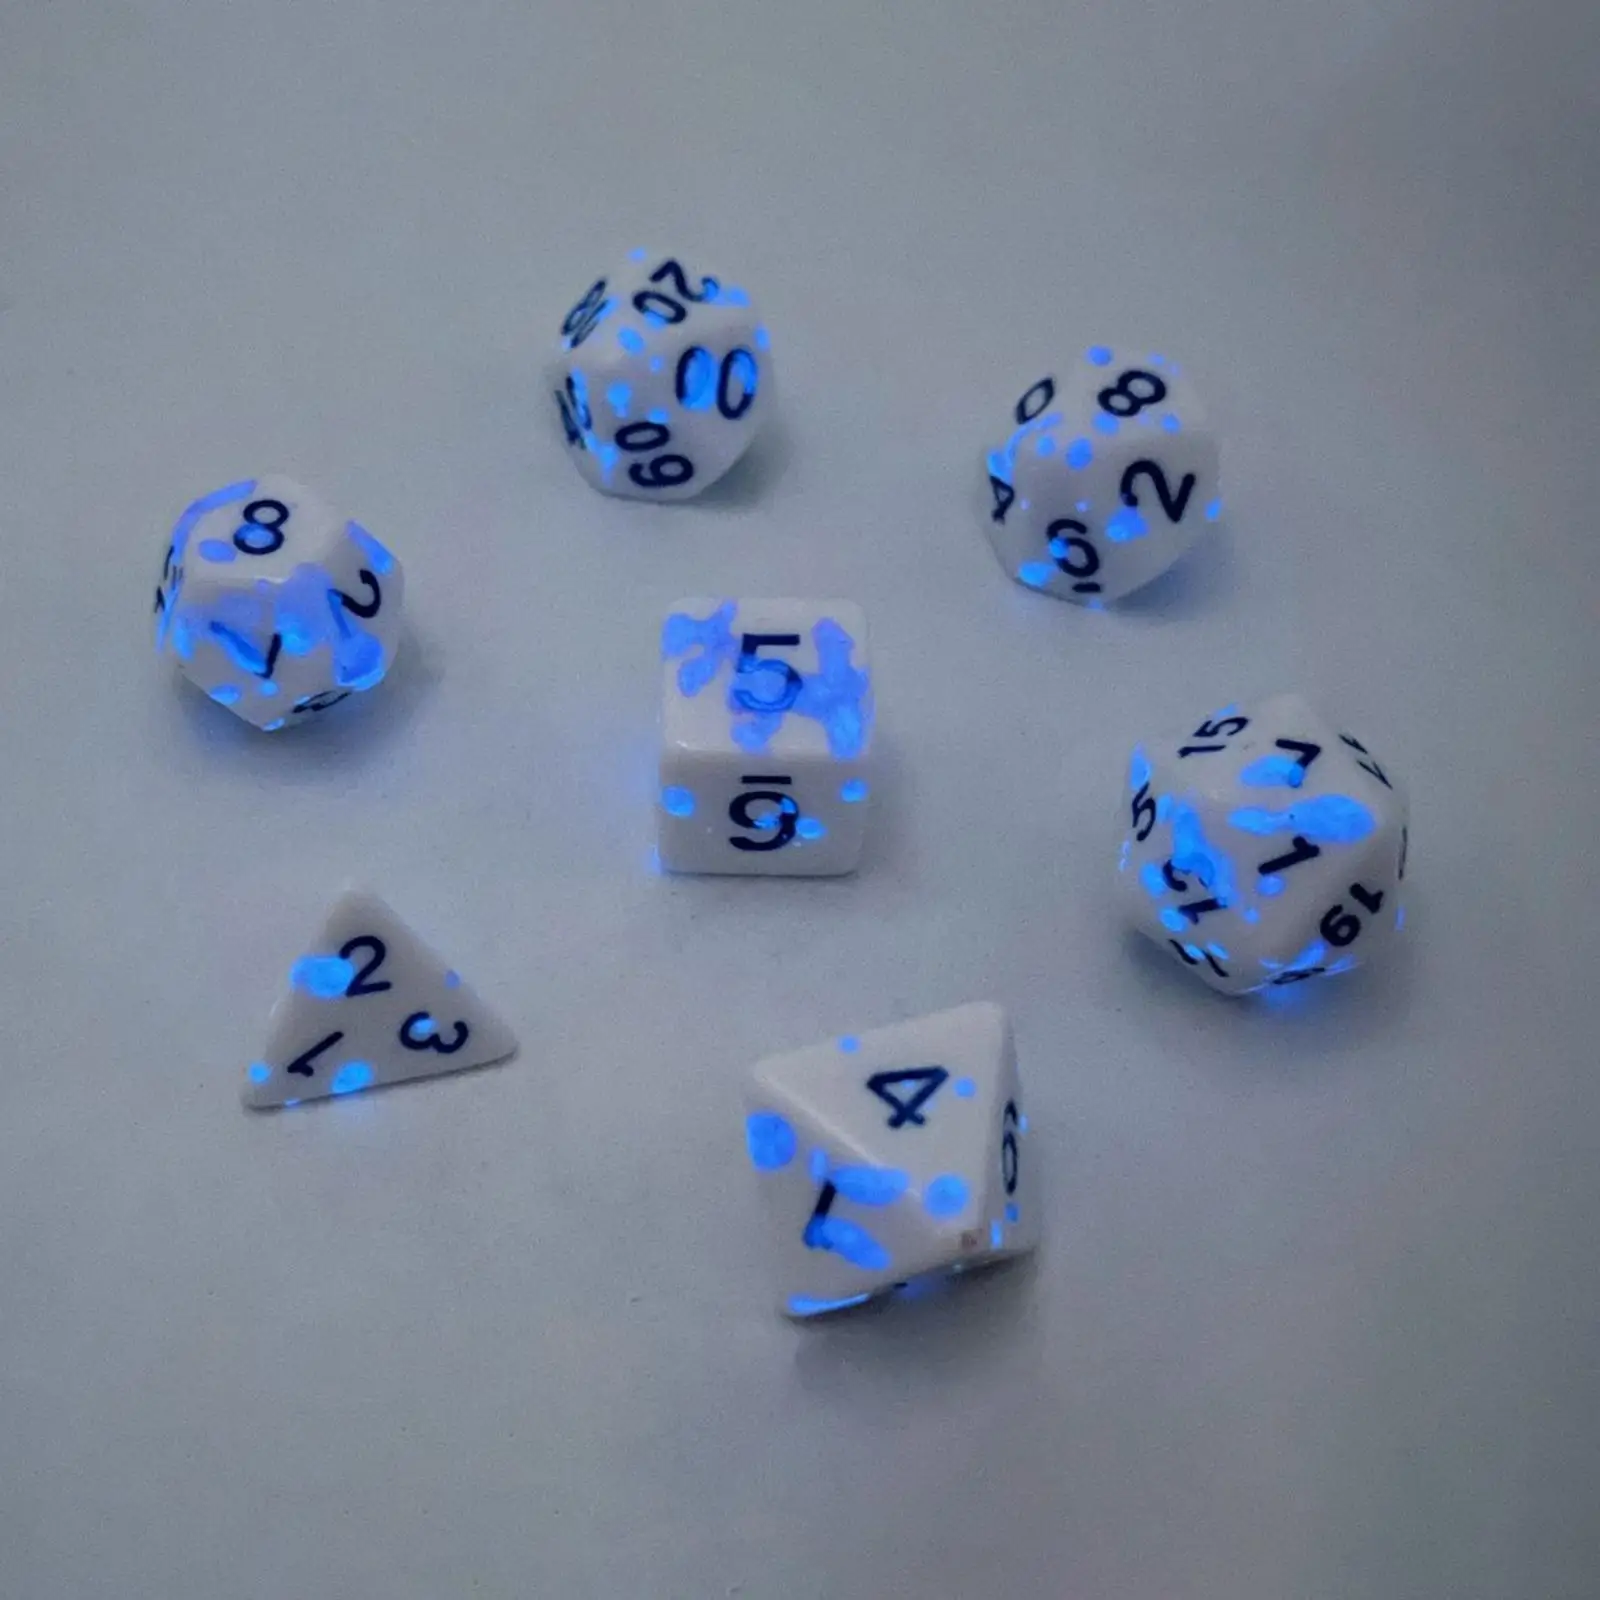 7Pieces Acrylic Polyhedral Dice Set D4 D6 D8 D10 D12 D20 Multisided Dice Color Changing Dice for Table Board Game Card Games